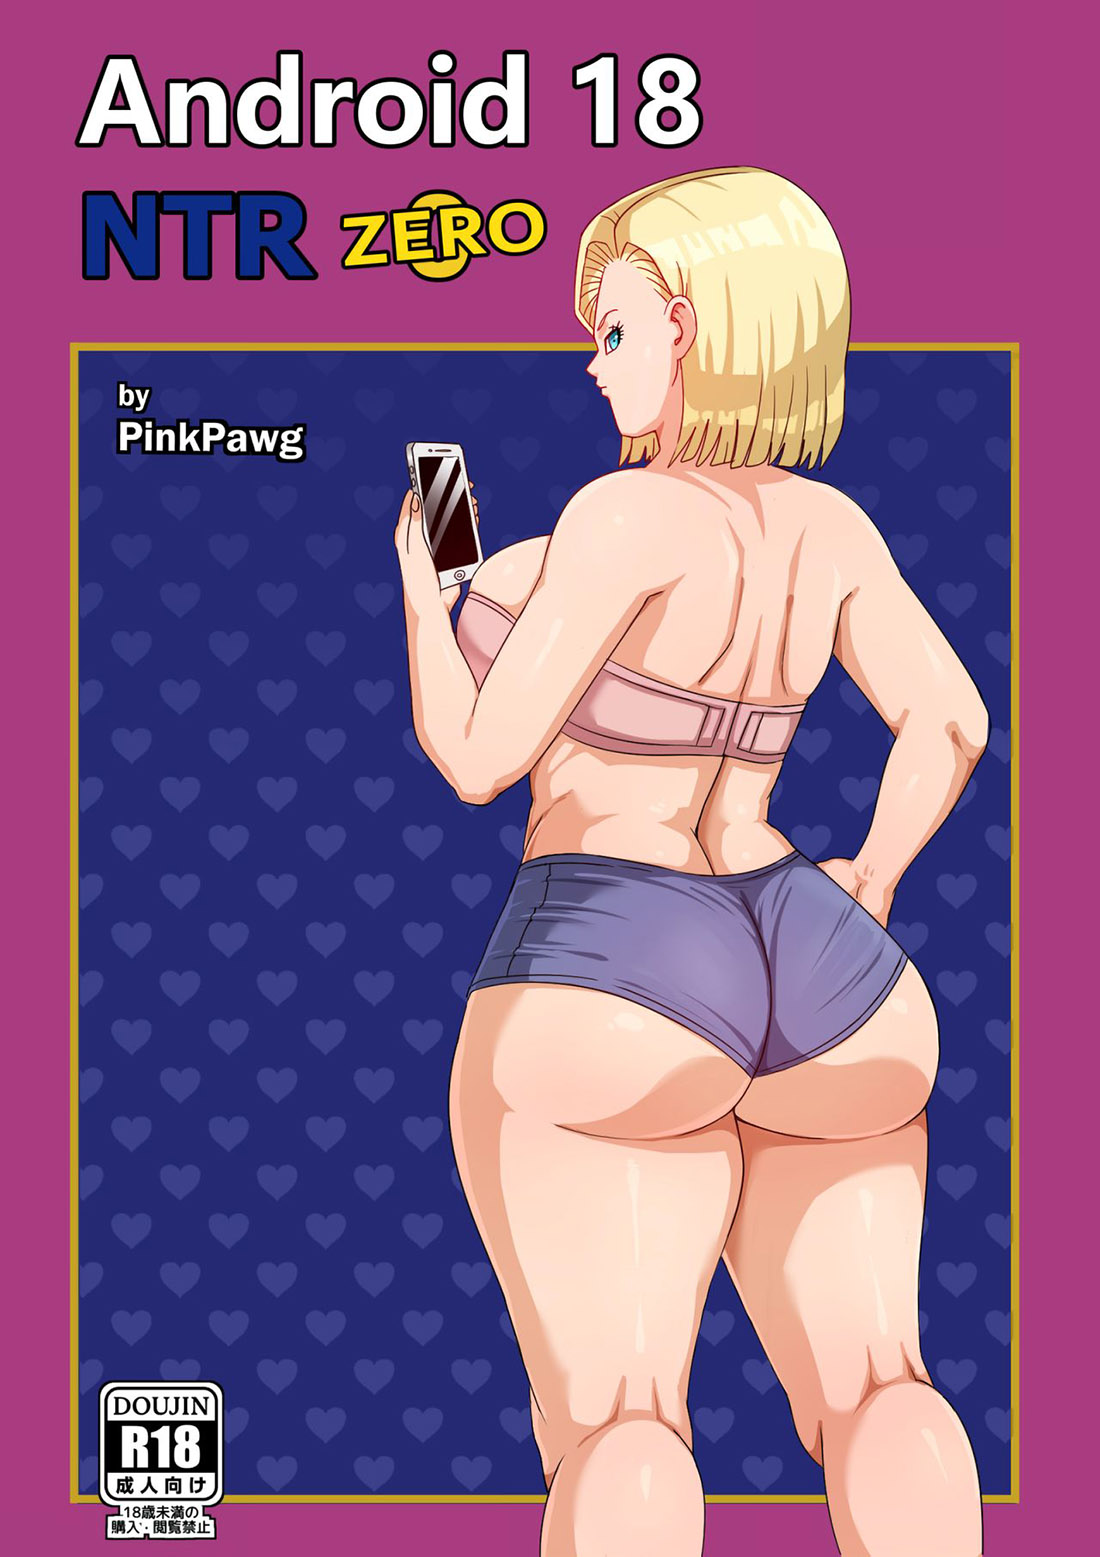 ANDROID 18 NTR parte 0